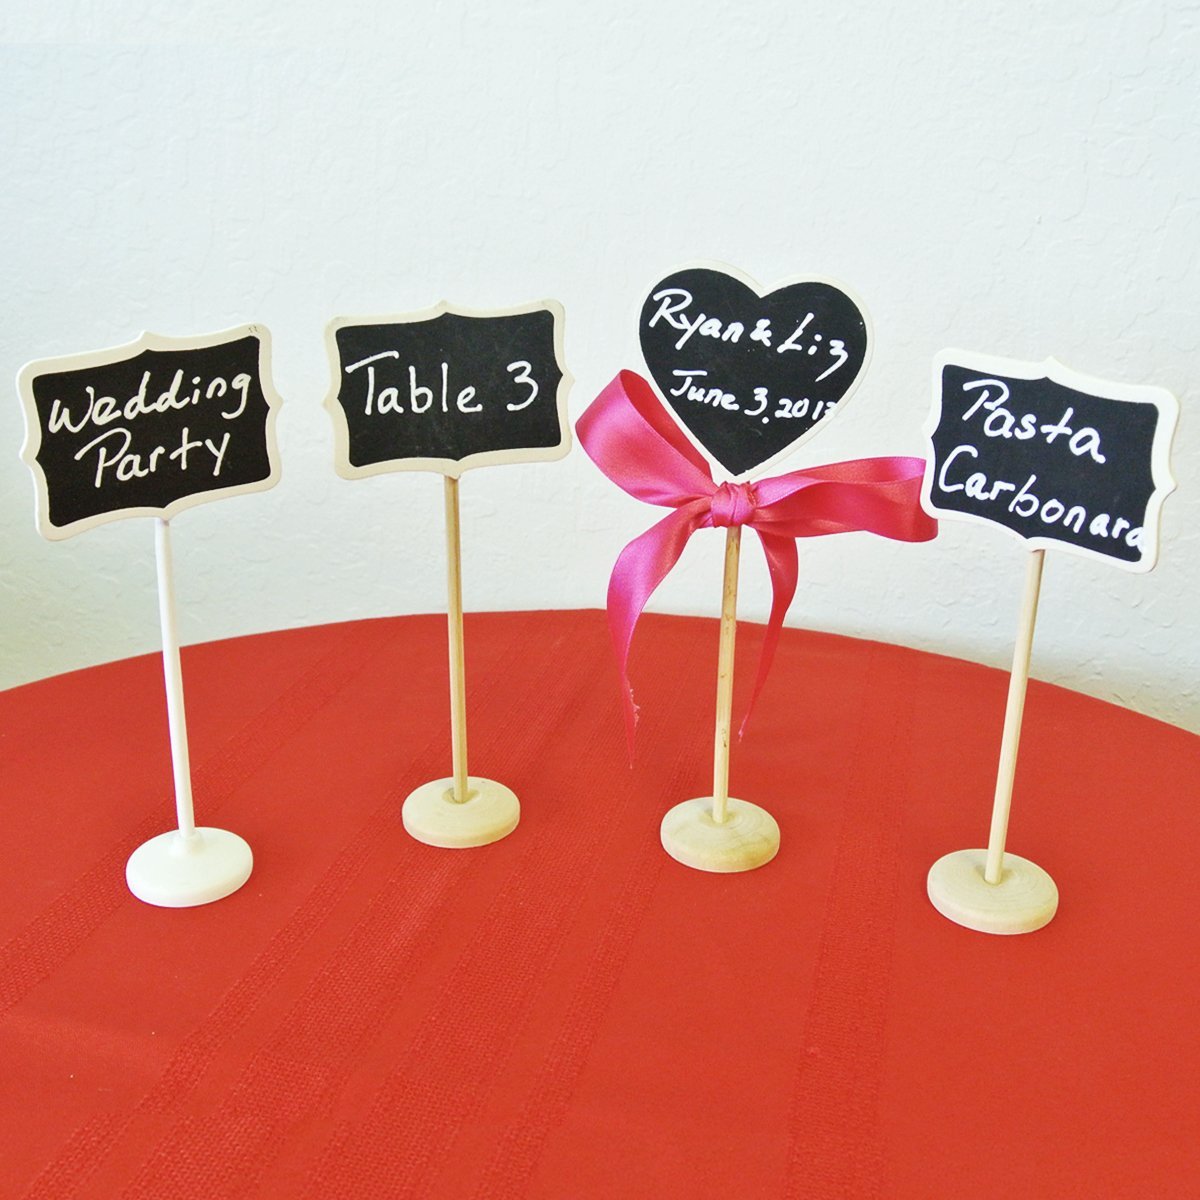 Set of 8 Chalkboard Stands With Chalkboard Stickers, 3.25" x 2.5" Cloud